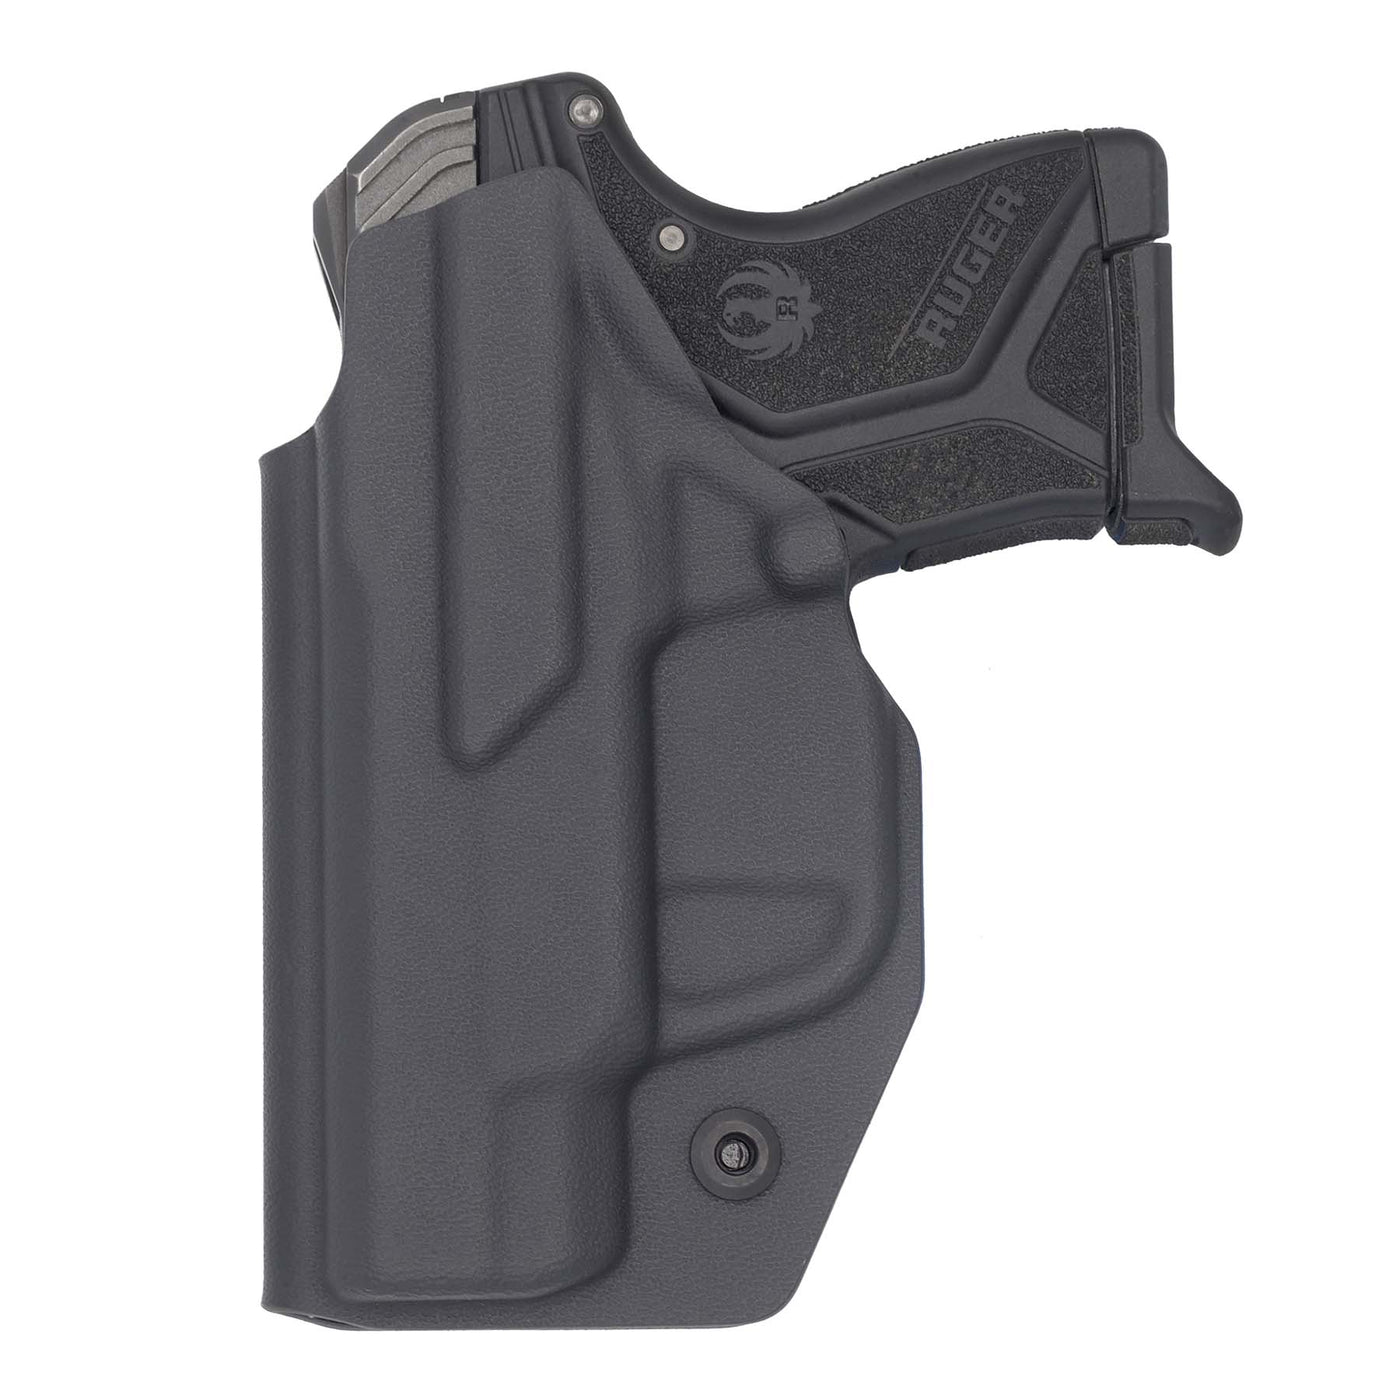 C&G Holsters quick ship Covert IWB kydex holster for LCPII in black rear view